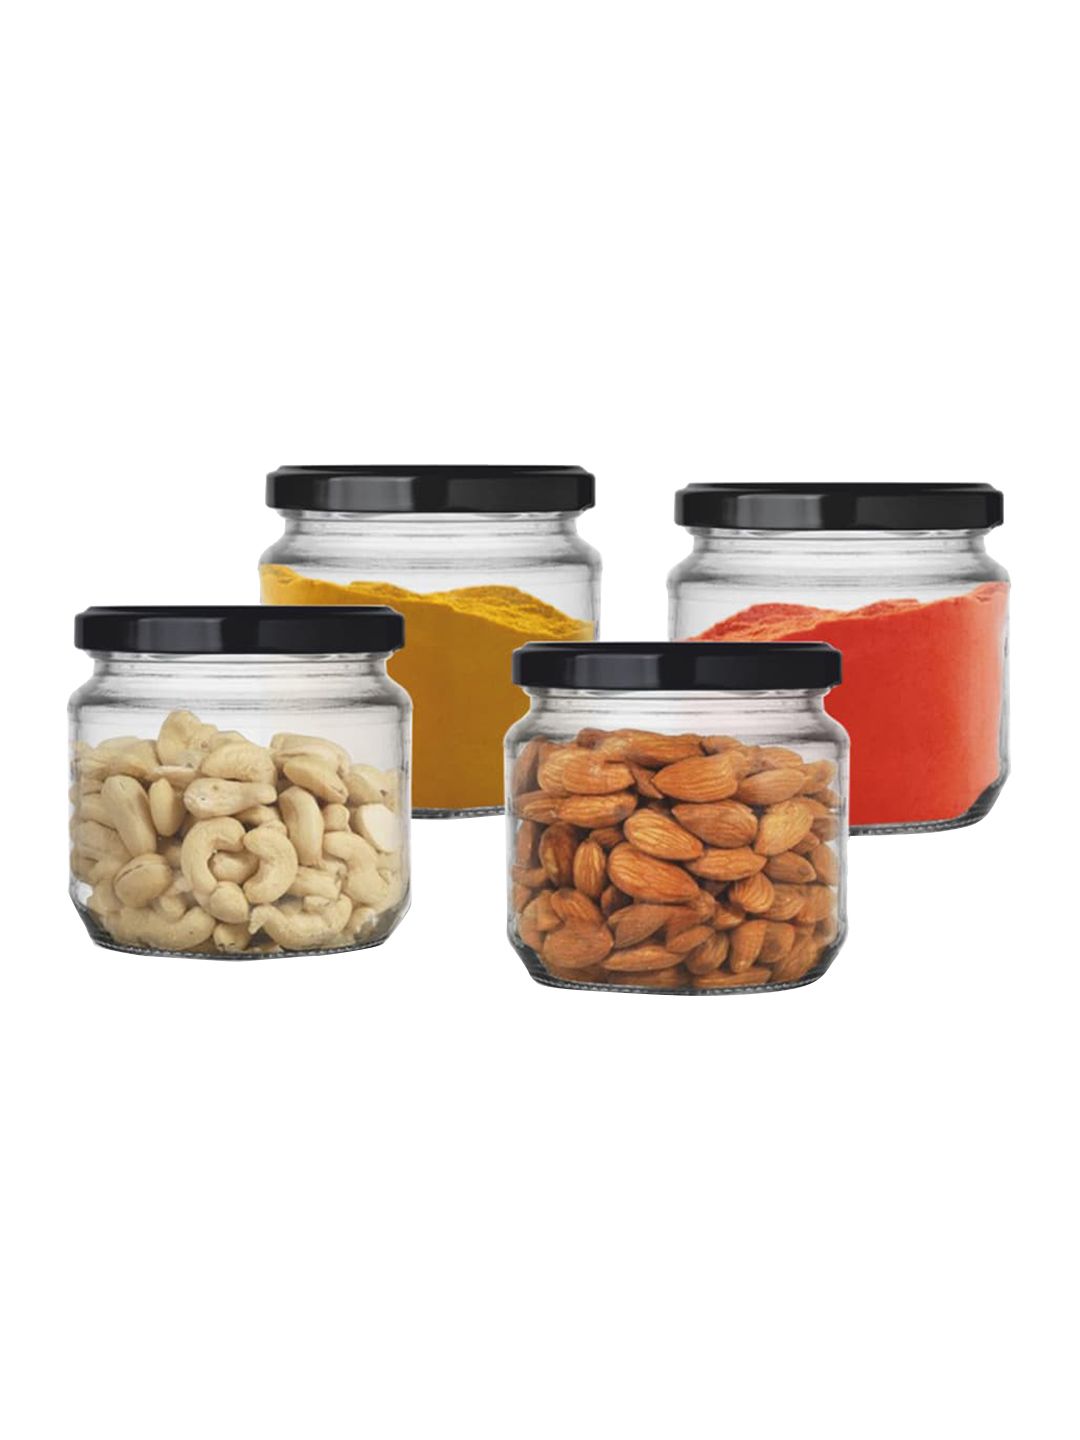 Home Centre Corsica Essentials Set Of 4 Transparent Glass Storage Jars with Lid - 350 ml Price in India